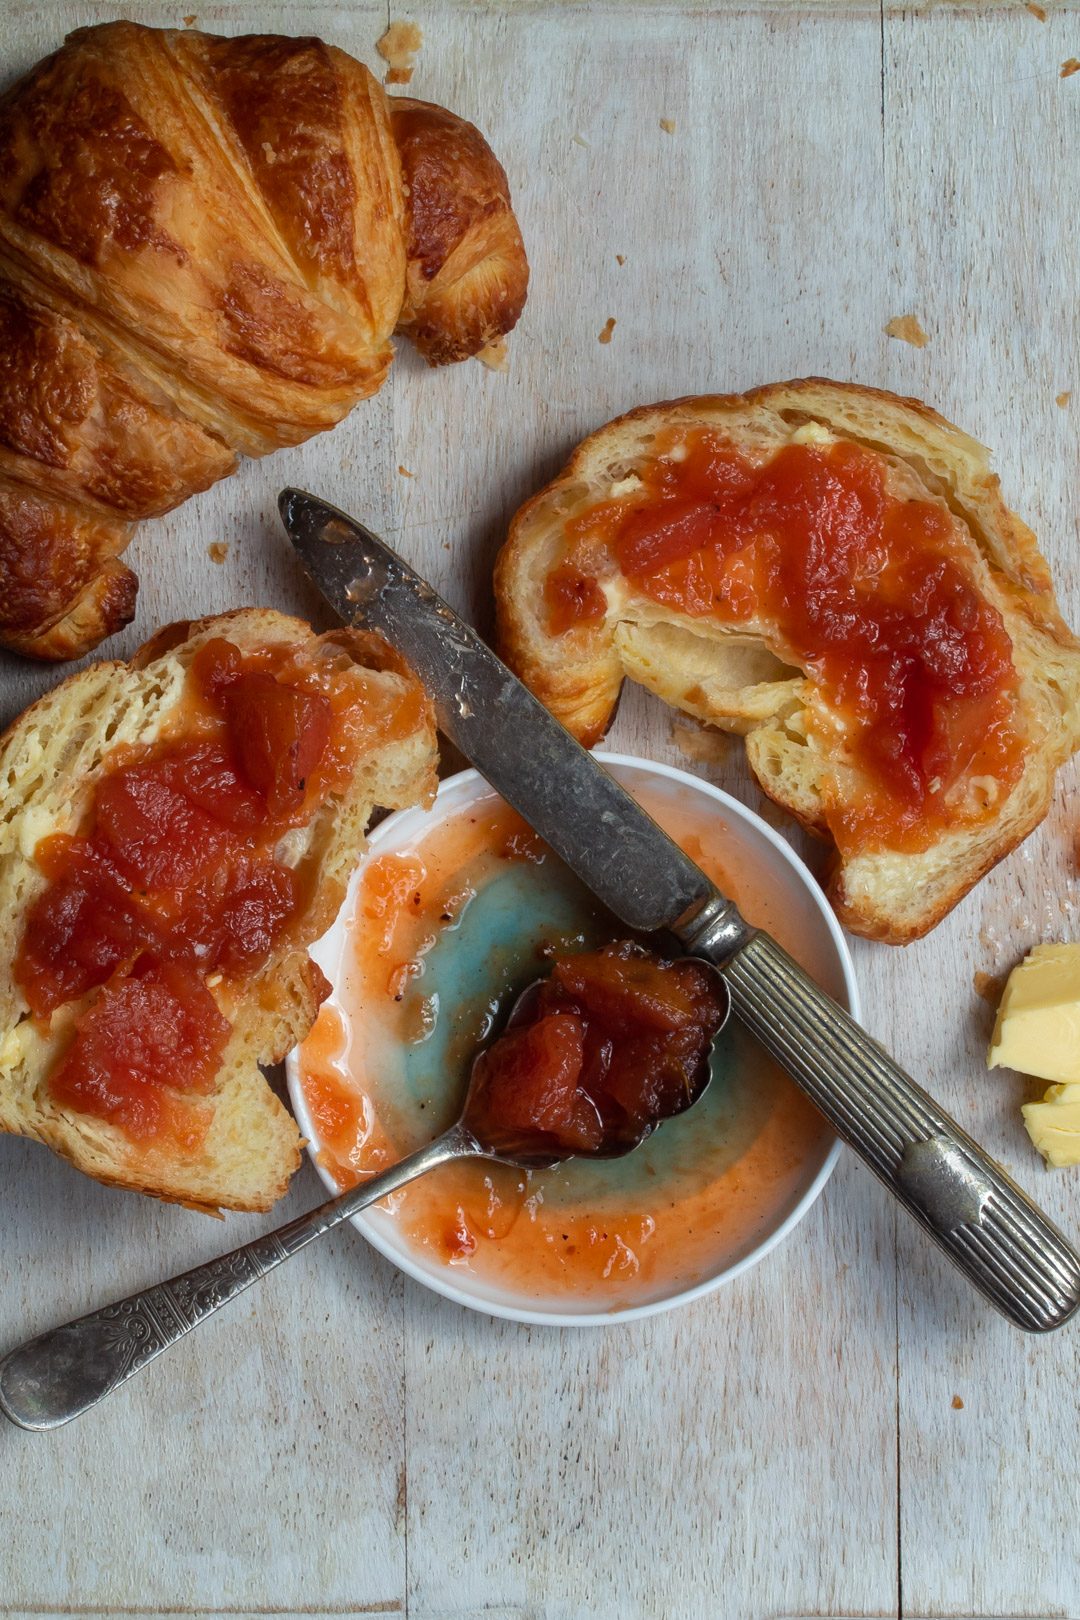 rustic quince apple jam with split croissant and whole croissant